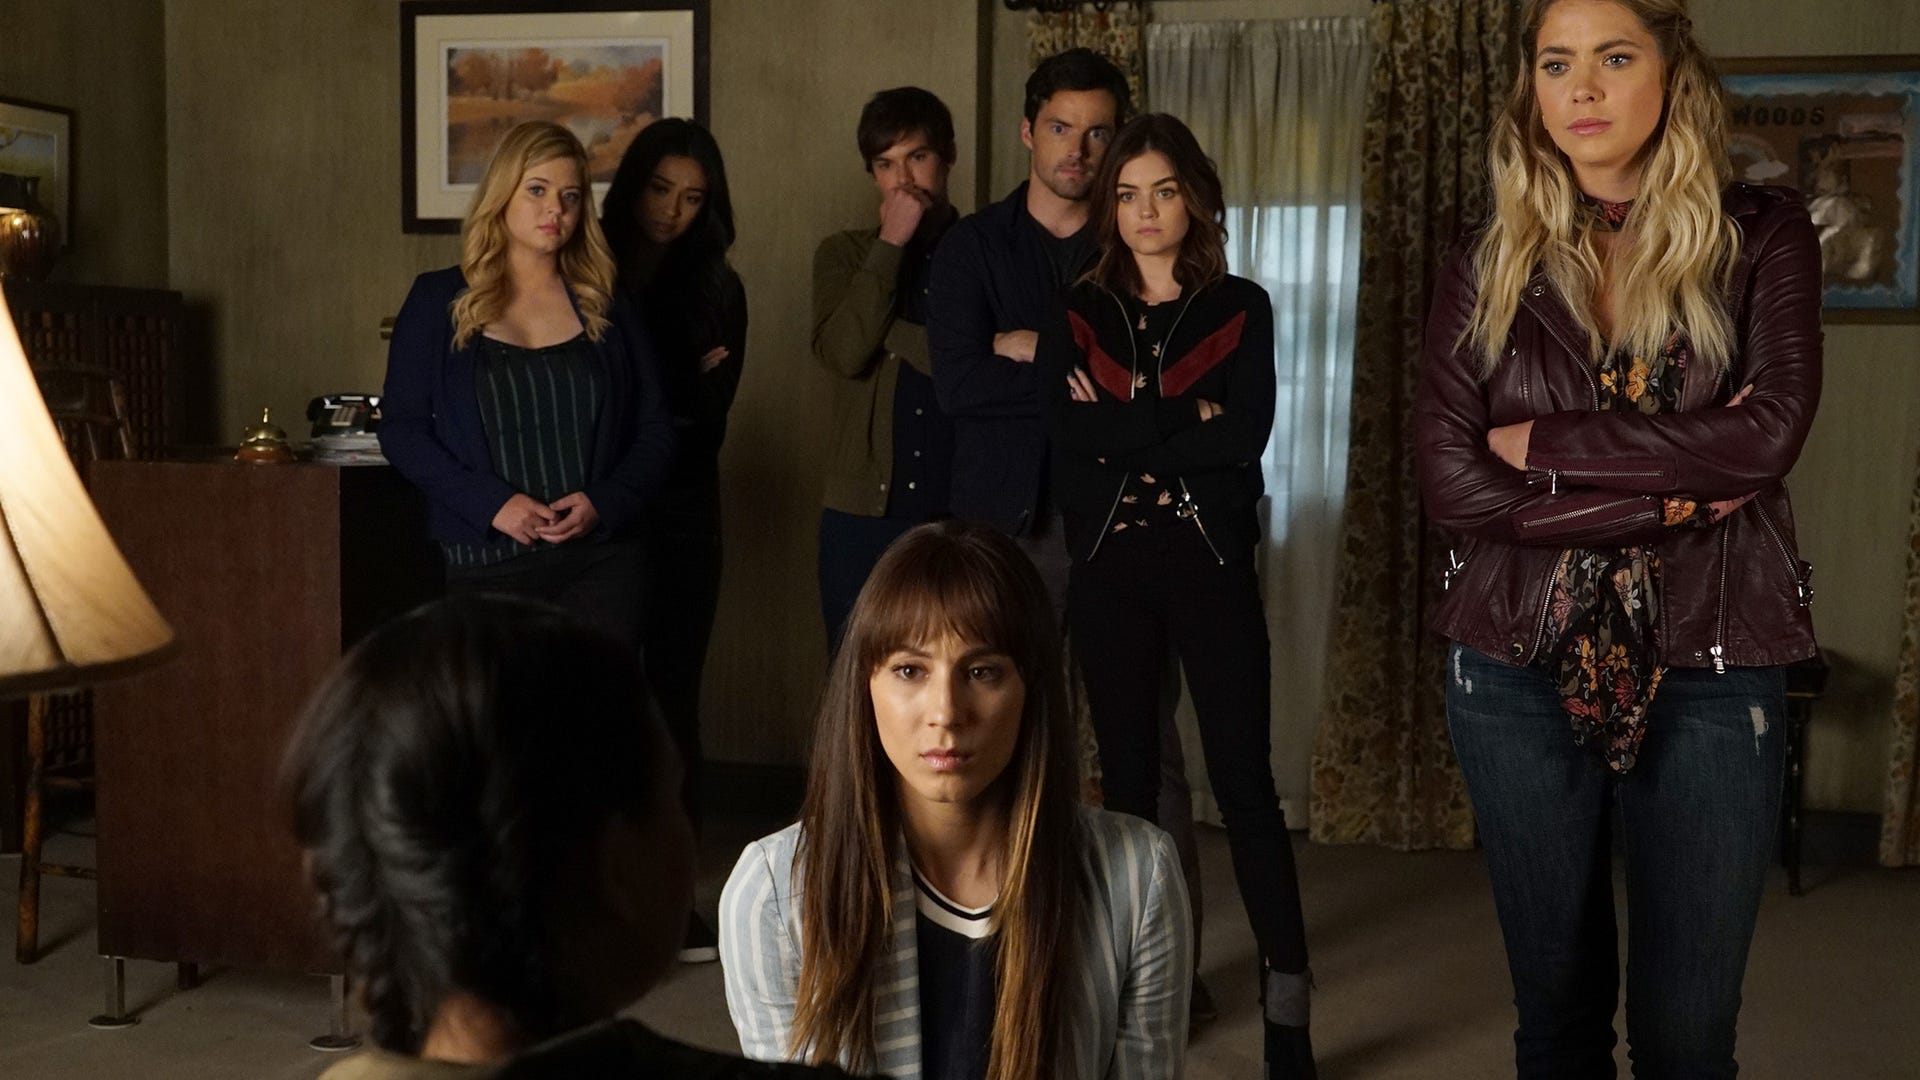 The Liars gather to help Mona (Janel Parrish) get the help she needs.